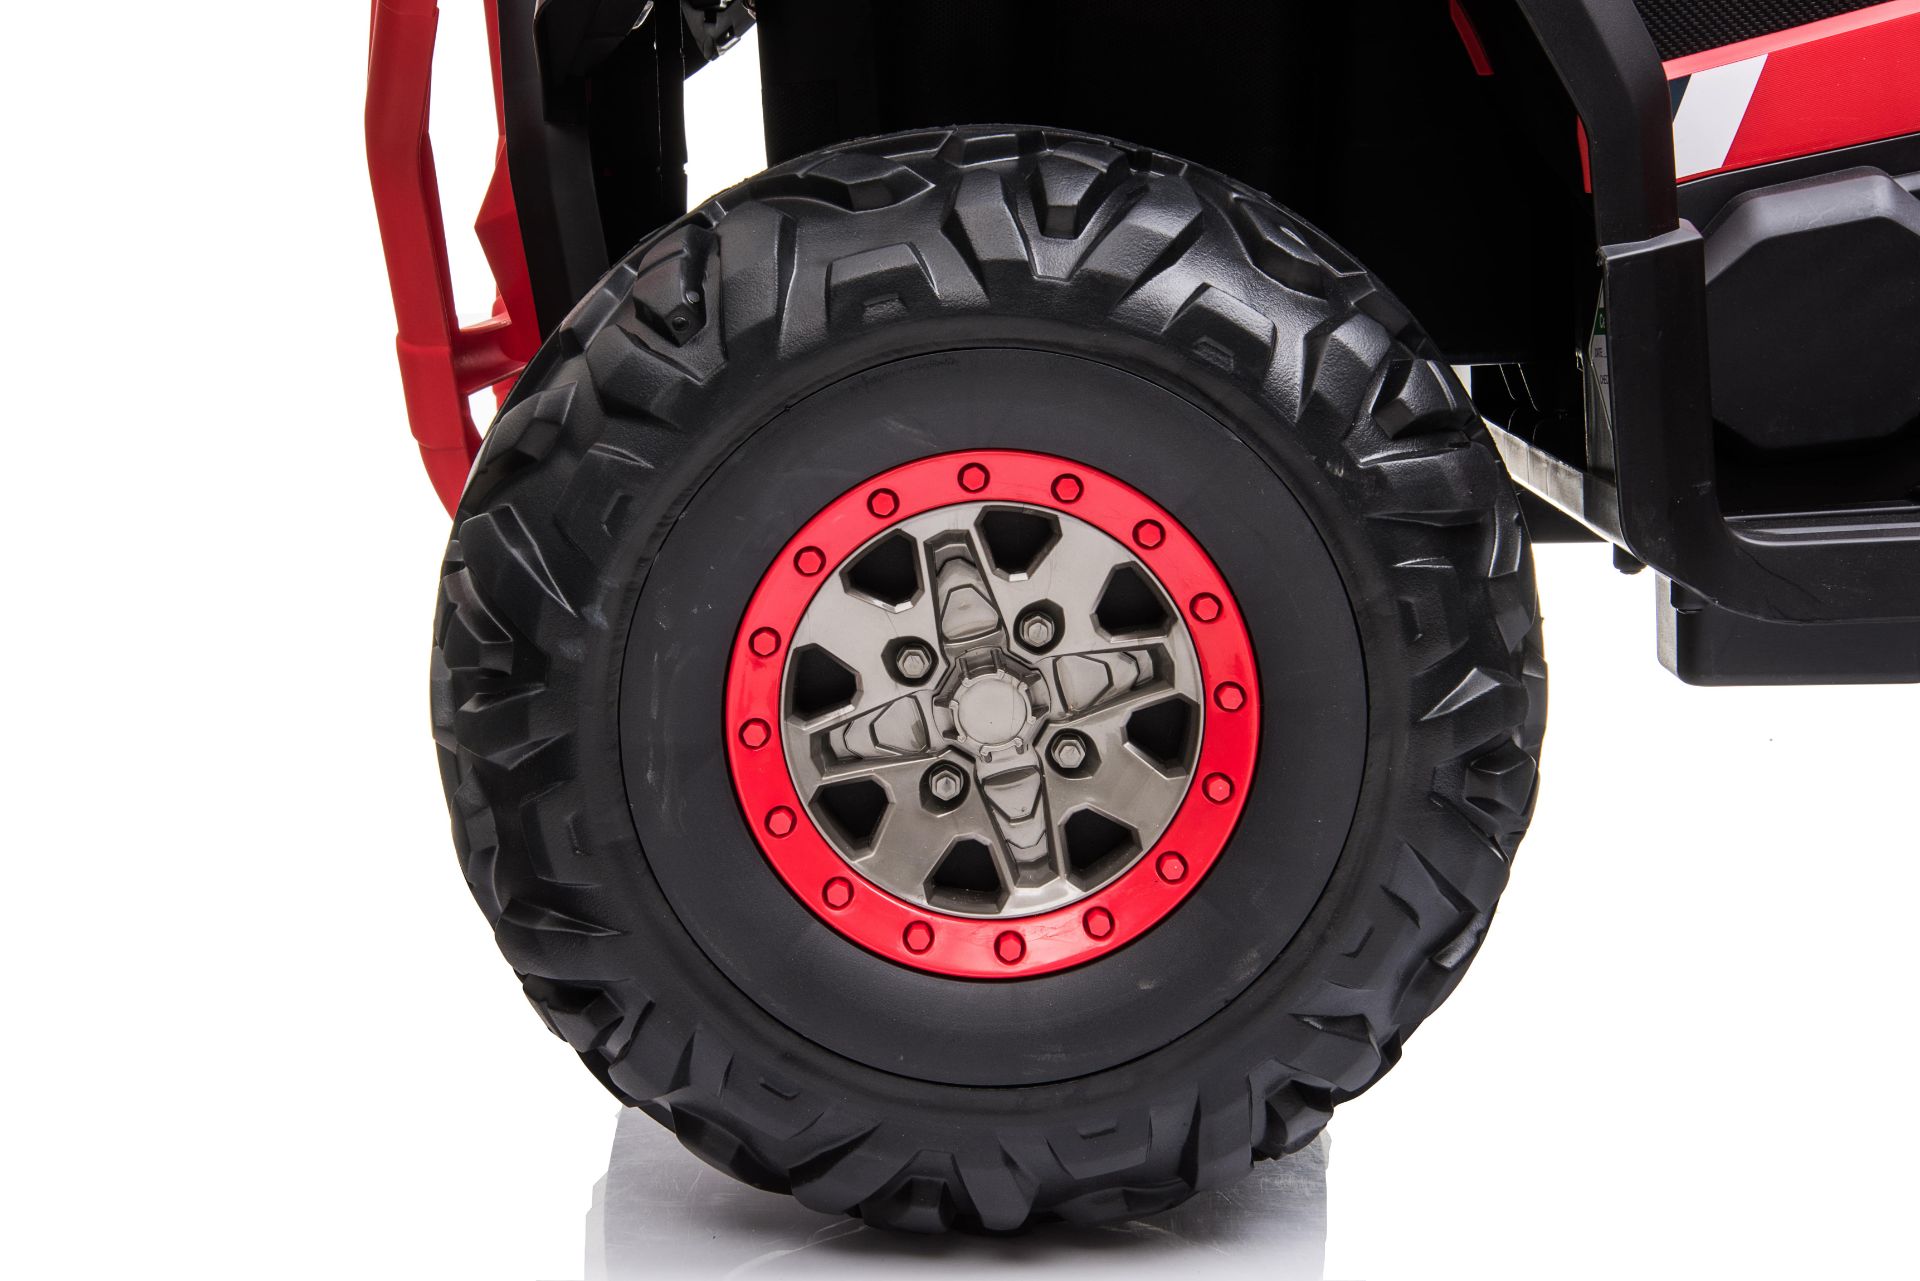 Brand New Ride On Childs Quad Bike 12v with Parental Remote Control - Red - Image 9 of 10